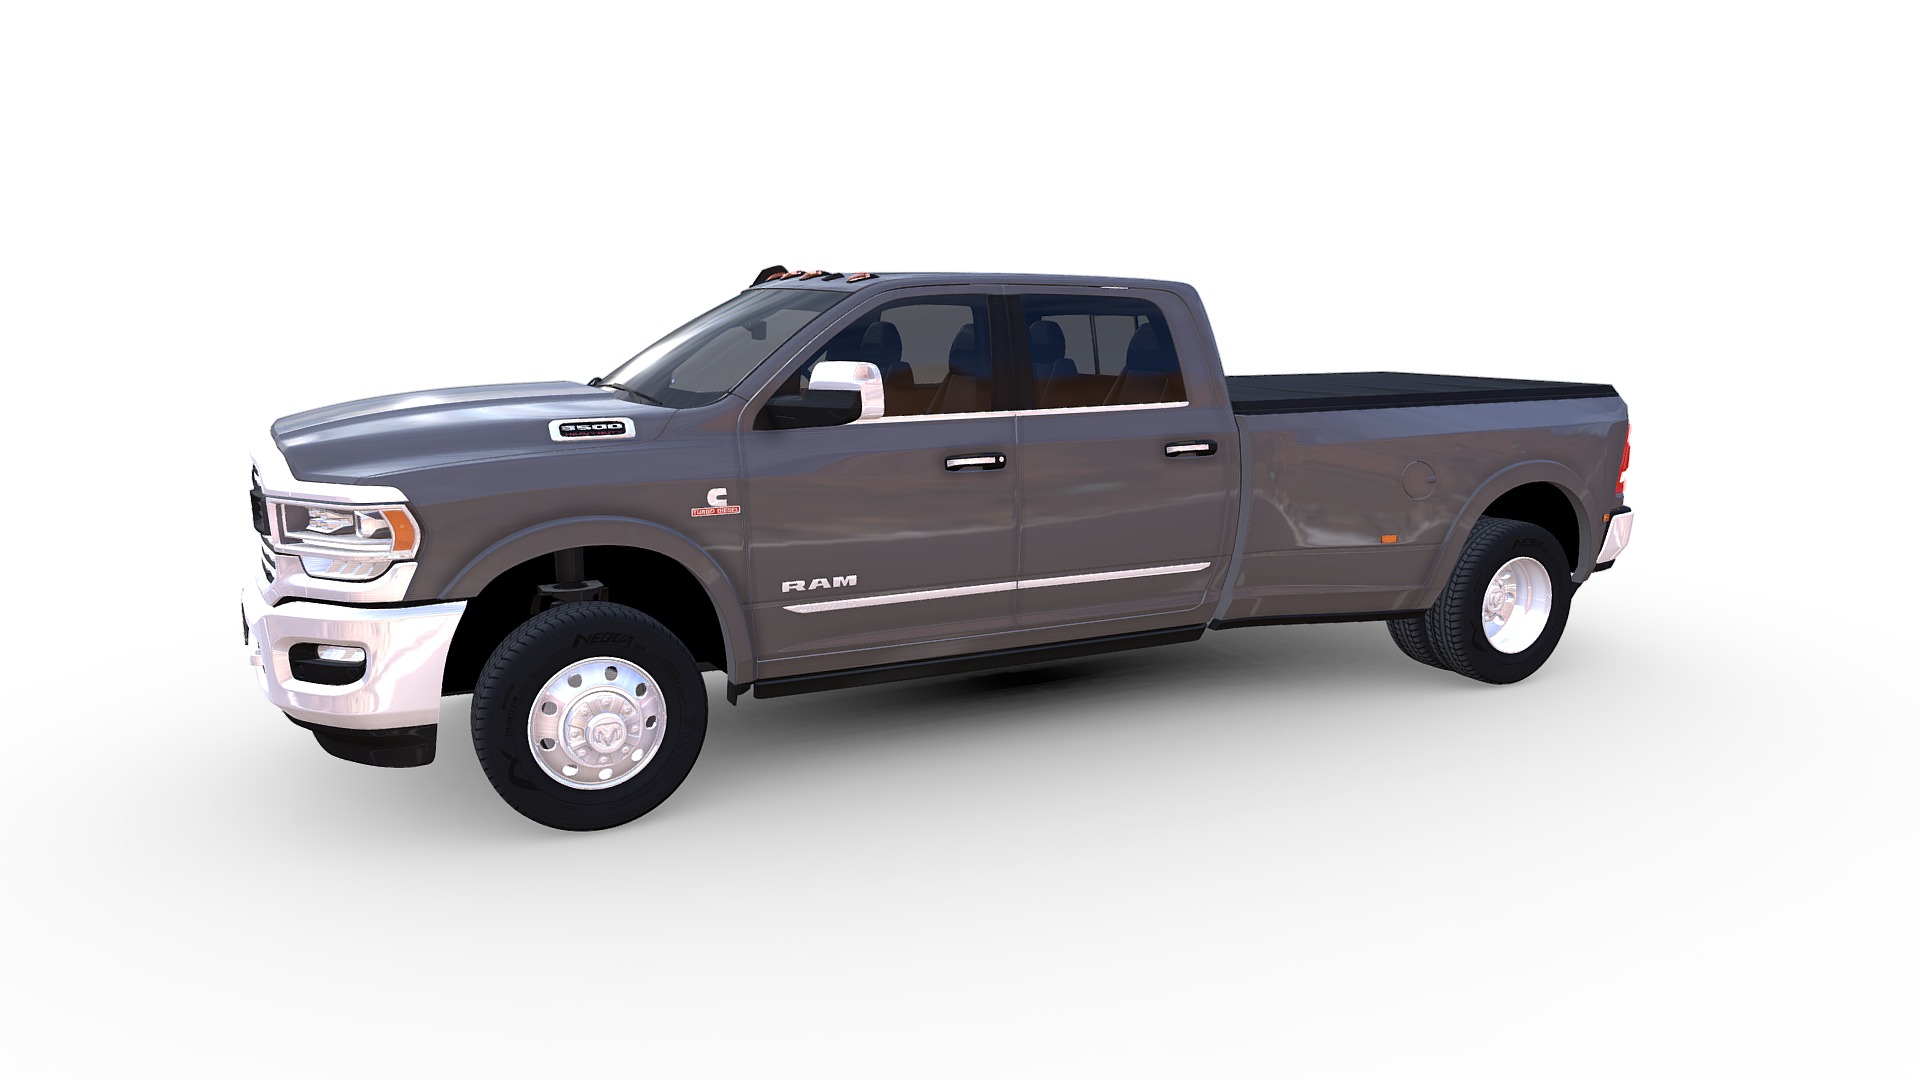 3D model Dodge Ram 3500 HD 2019 - This is a 3D model of the Dodge Ram 3500 HD 2019. The 3D model is about a car parked on a white background.